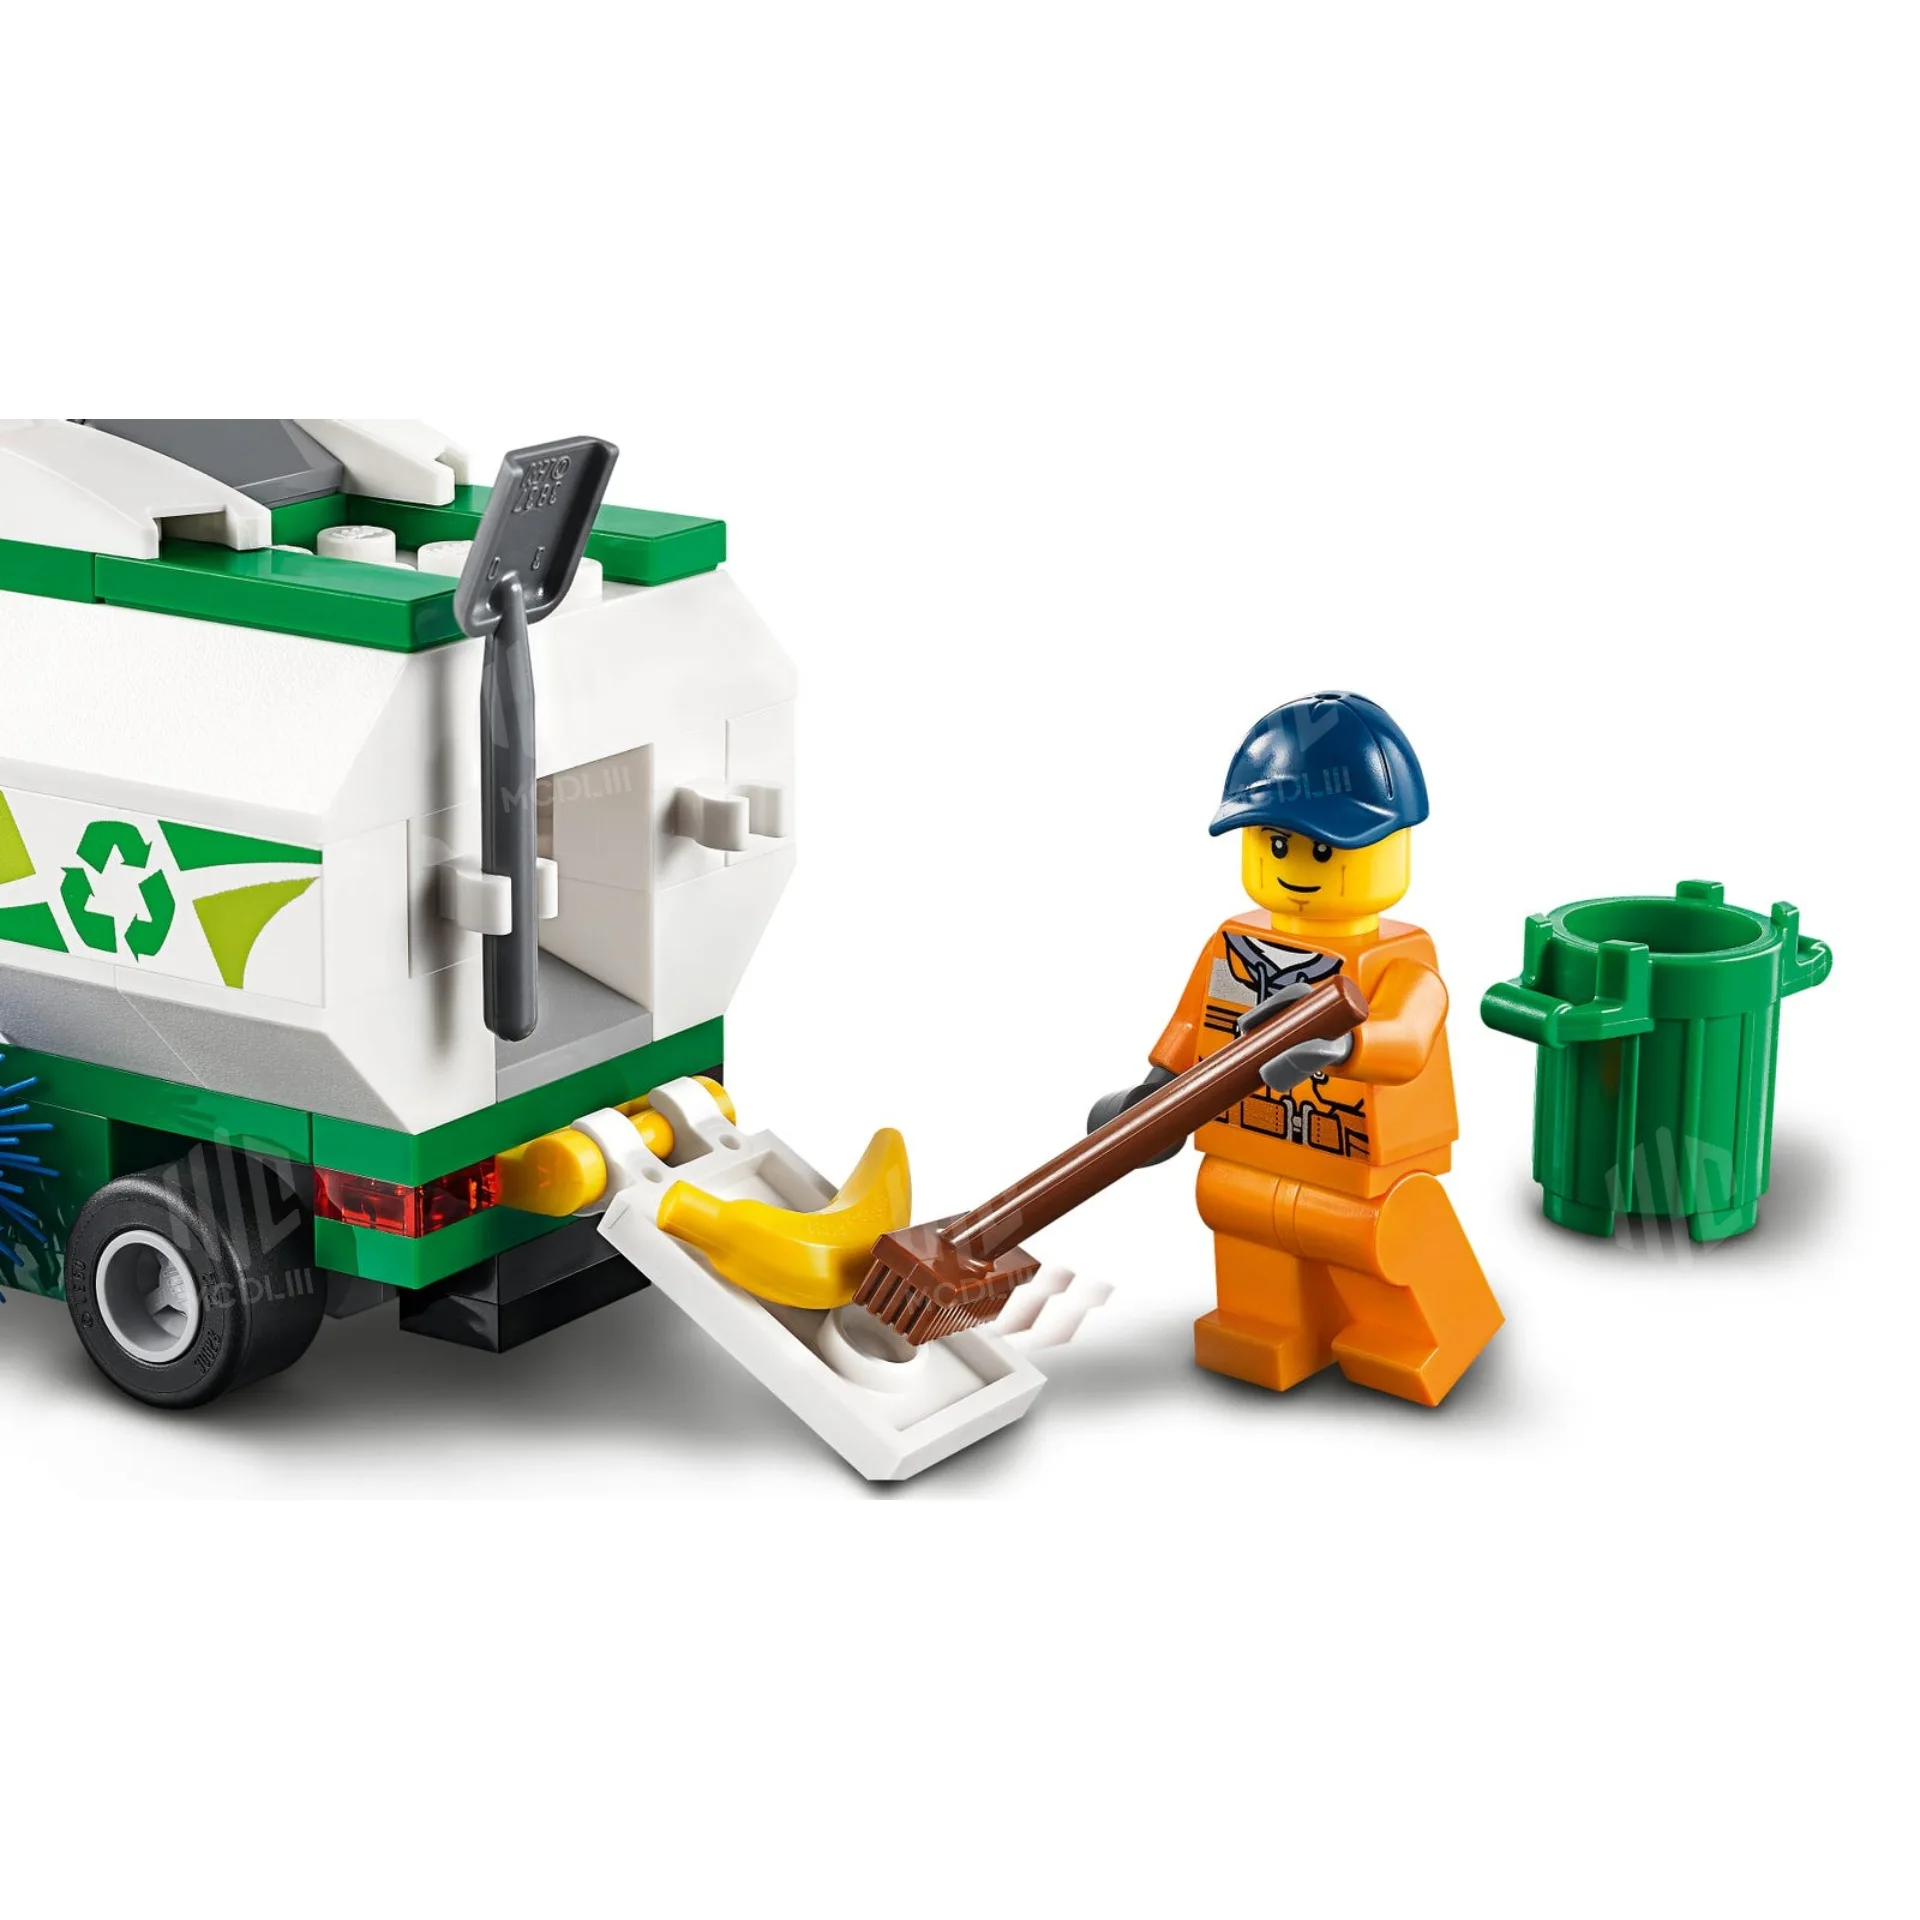 Lego City Street Sweeper 60249 For Lego Collection Minifigure Blocks Original Lego Car For Childrens Toy Gift - Blocks - AliExpress